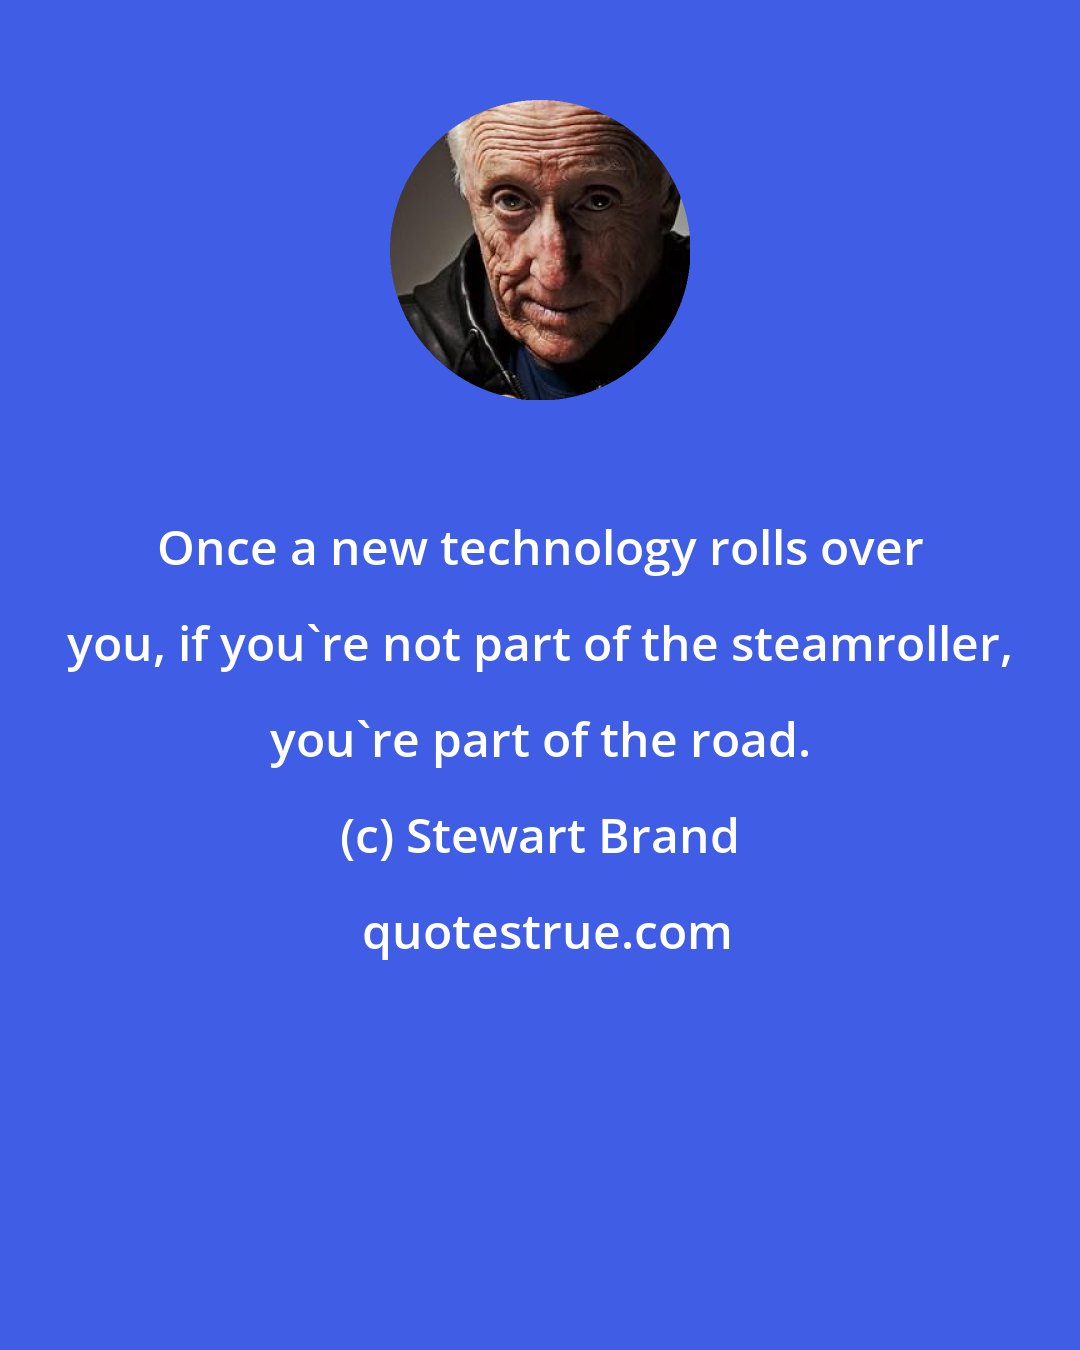 Stewart Brand: Once a new technology rolls over you, if you're not part of the steamroller, you're part of the road.